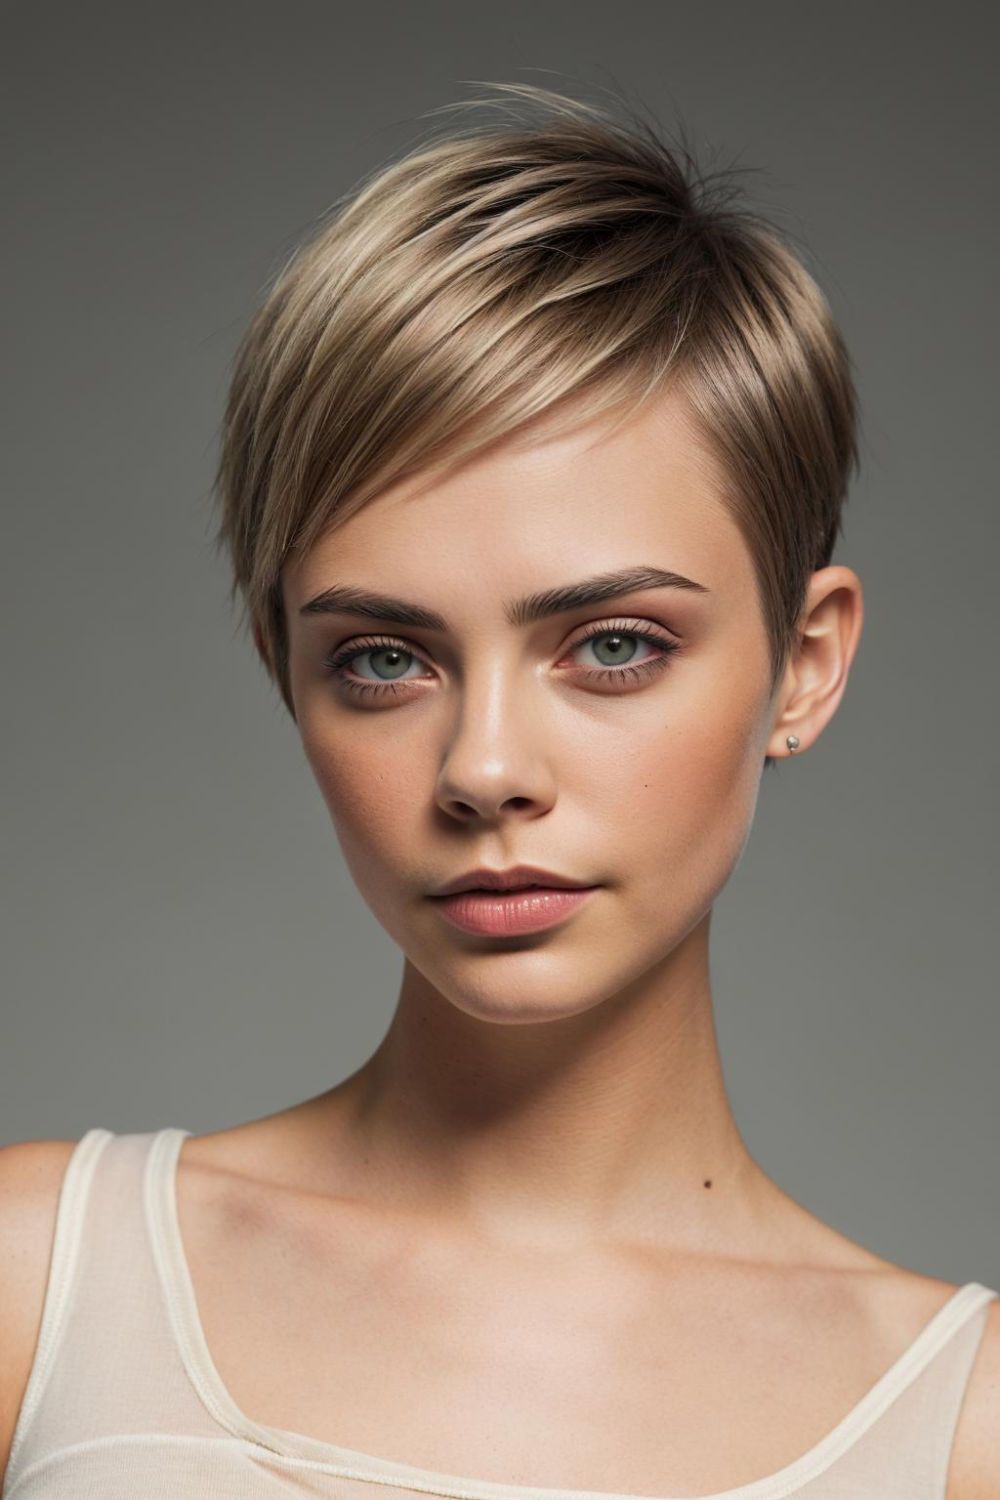 blunt pixie cut layered short hairstyle